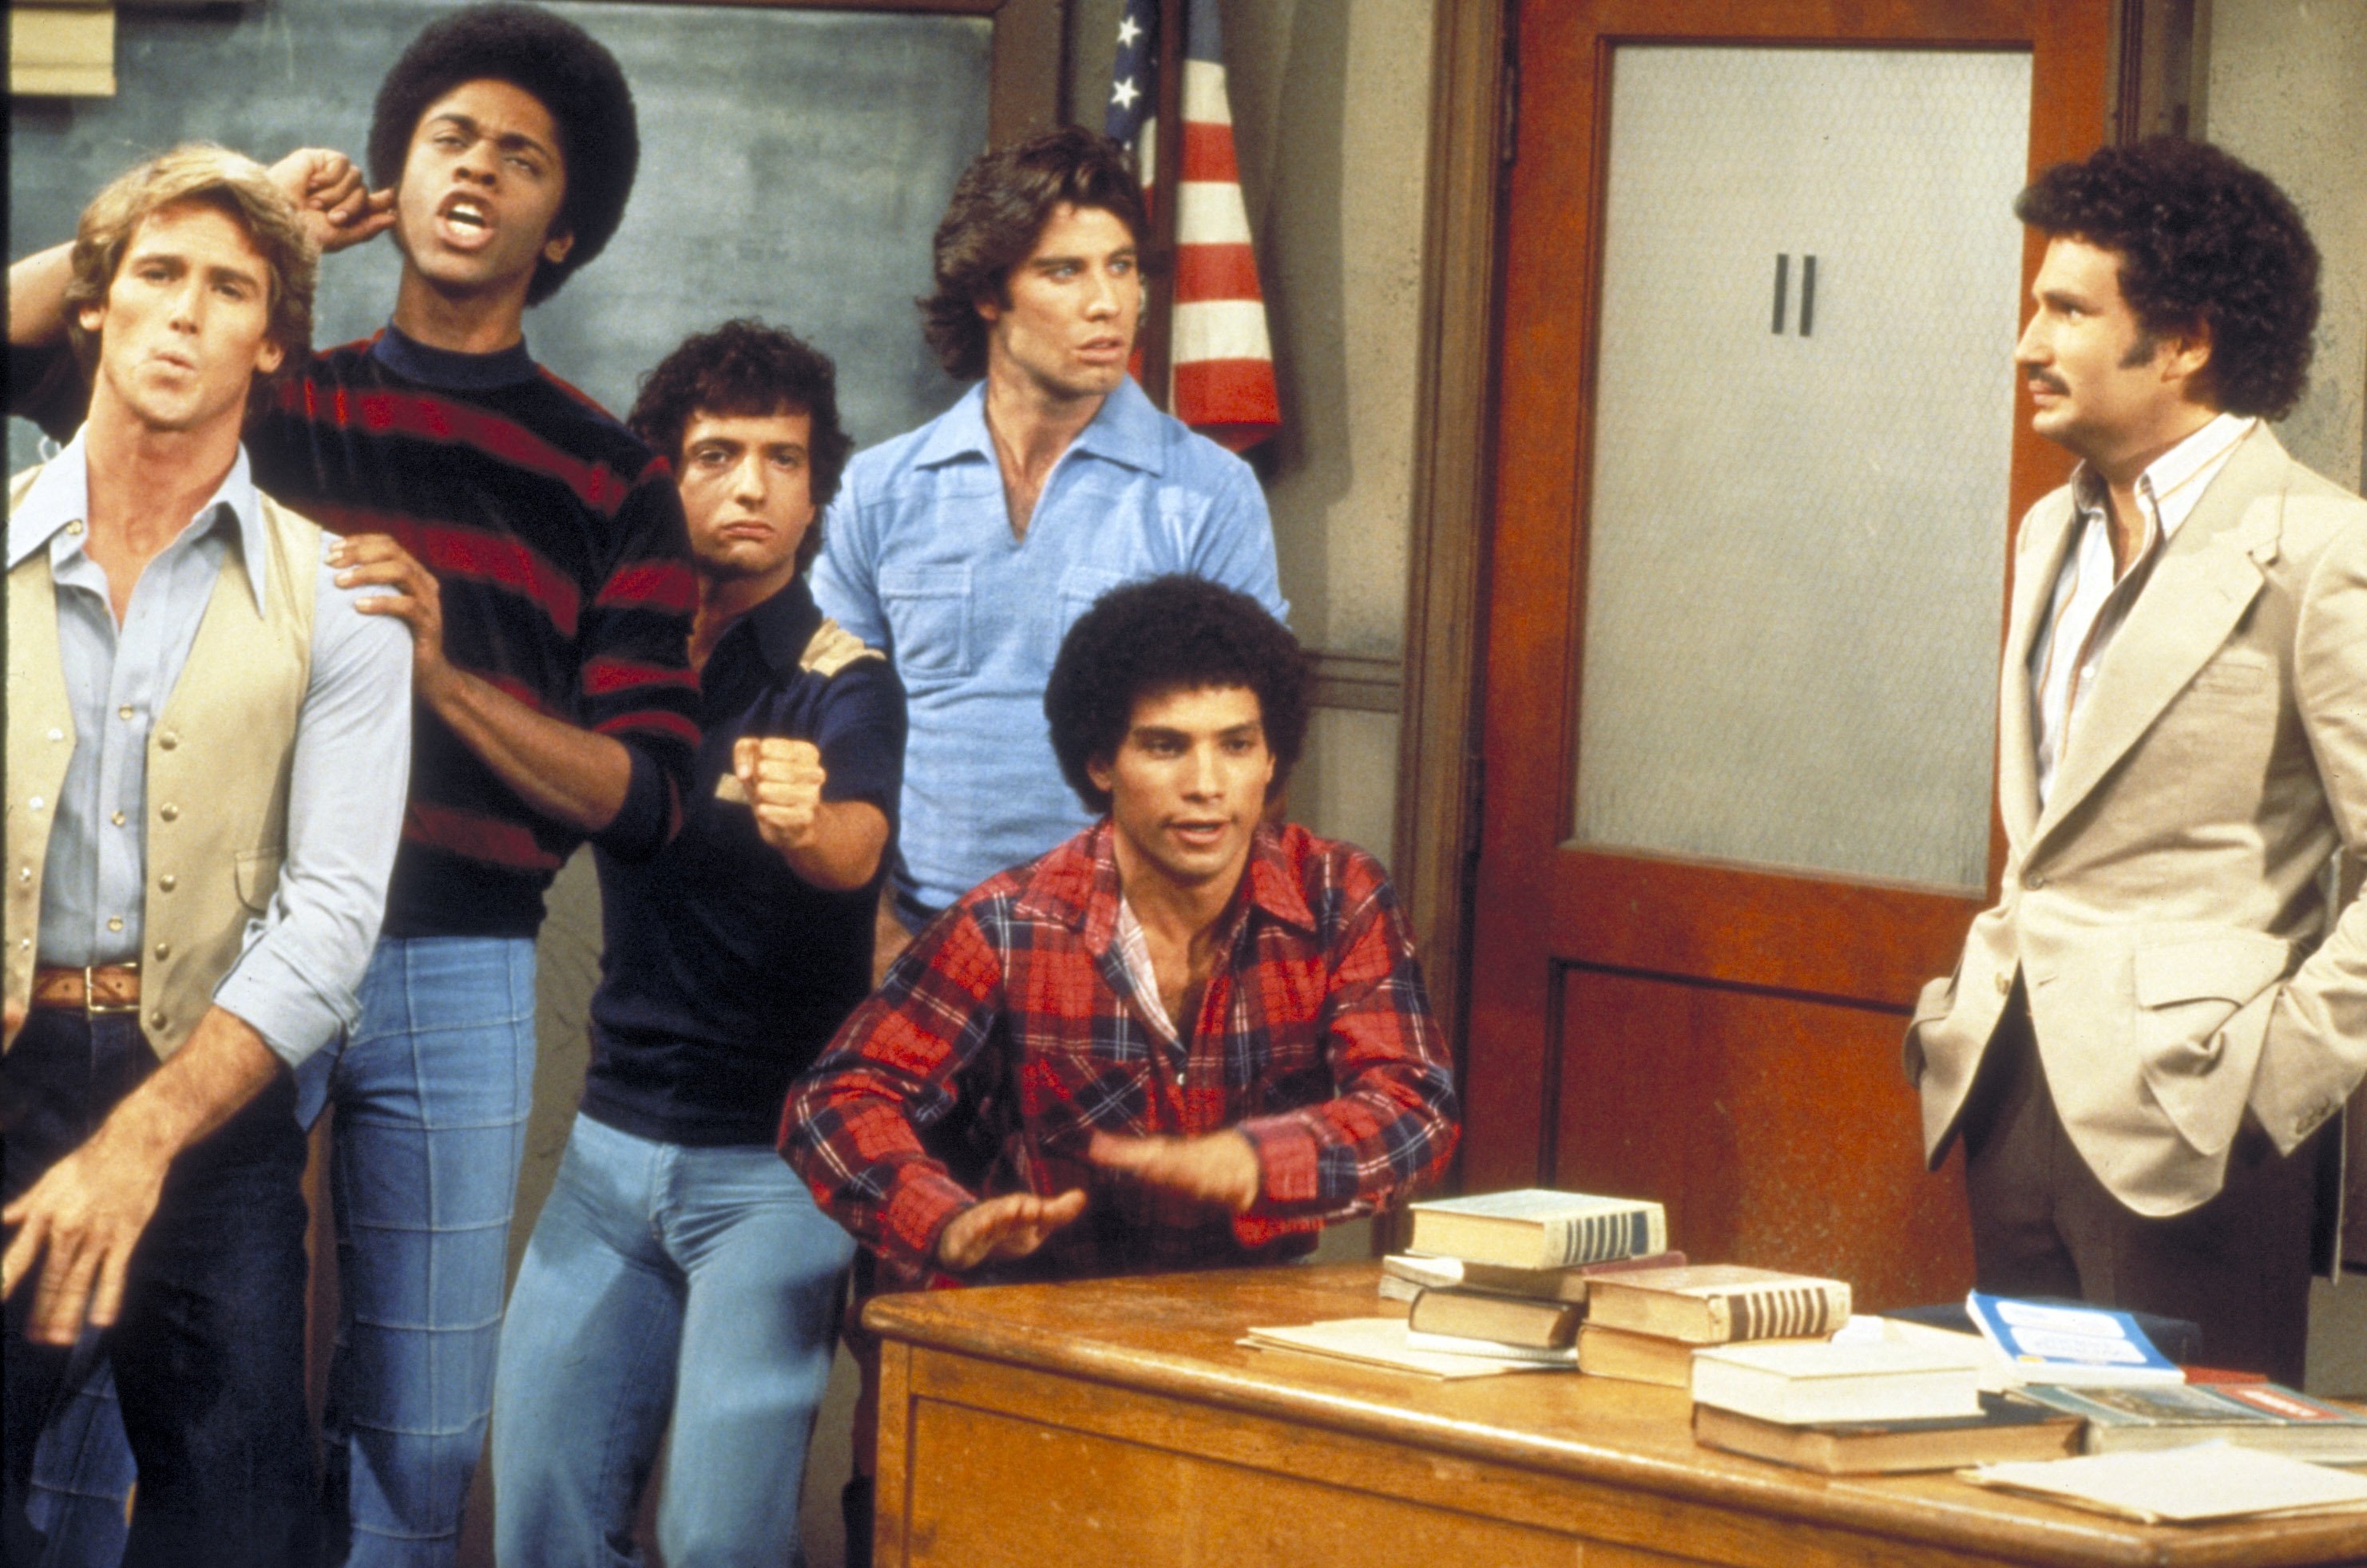 John Travolta, Ron Palillo, Gabe Kaplan, Robert Hegyes and Lawrence Hilton-Jacobs in "Welcome Back, Kotter" | Photo: ABC Photo Archives/Disney General Entertainment Content via Getty Images